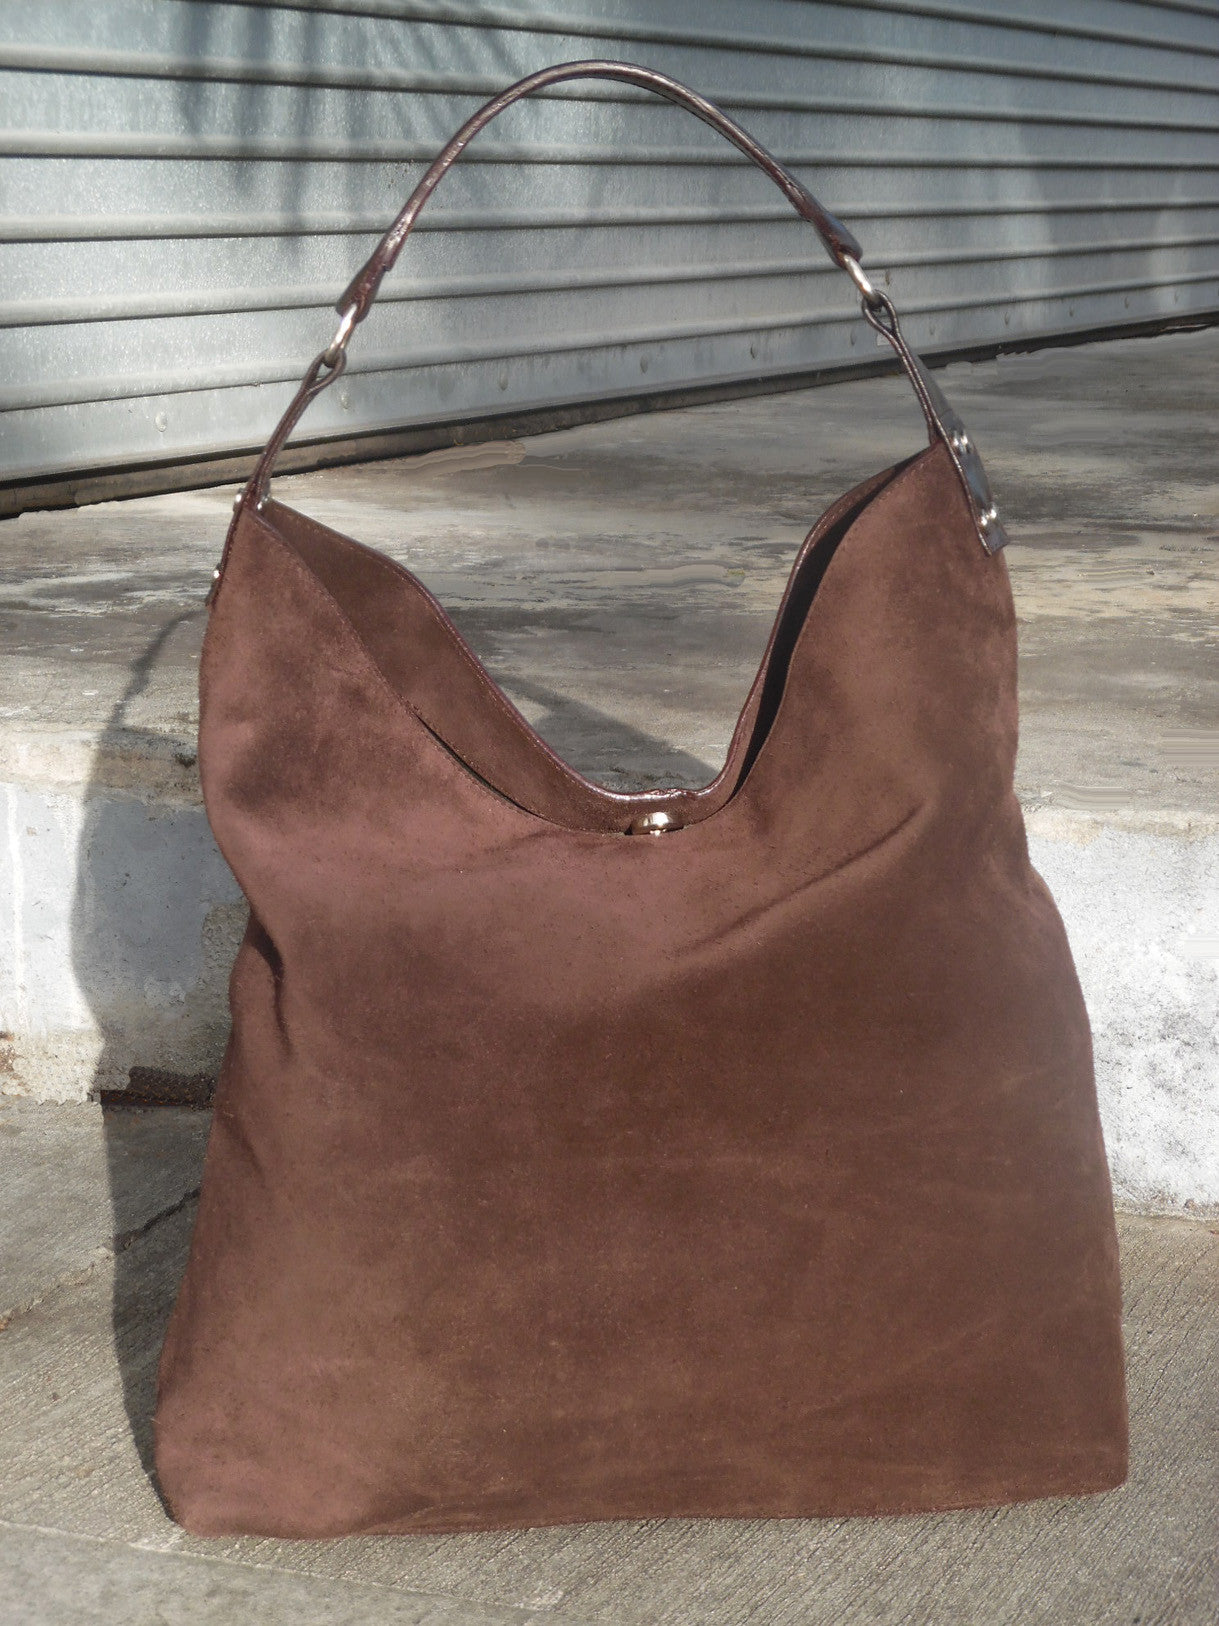 Pancho Hobo Bag In Suede Black or Chocolate